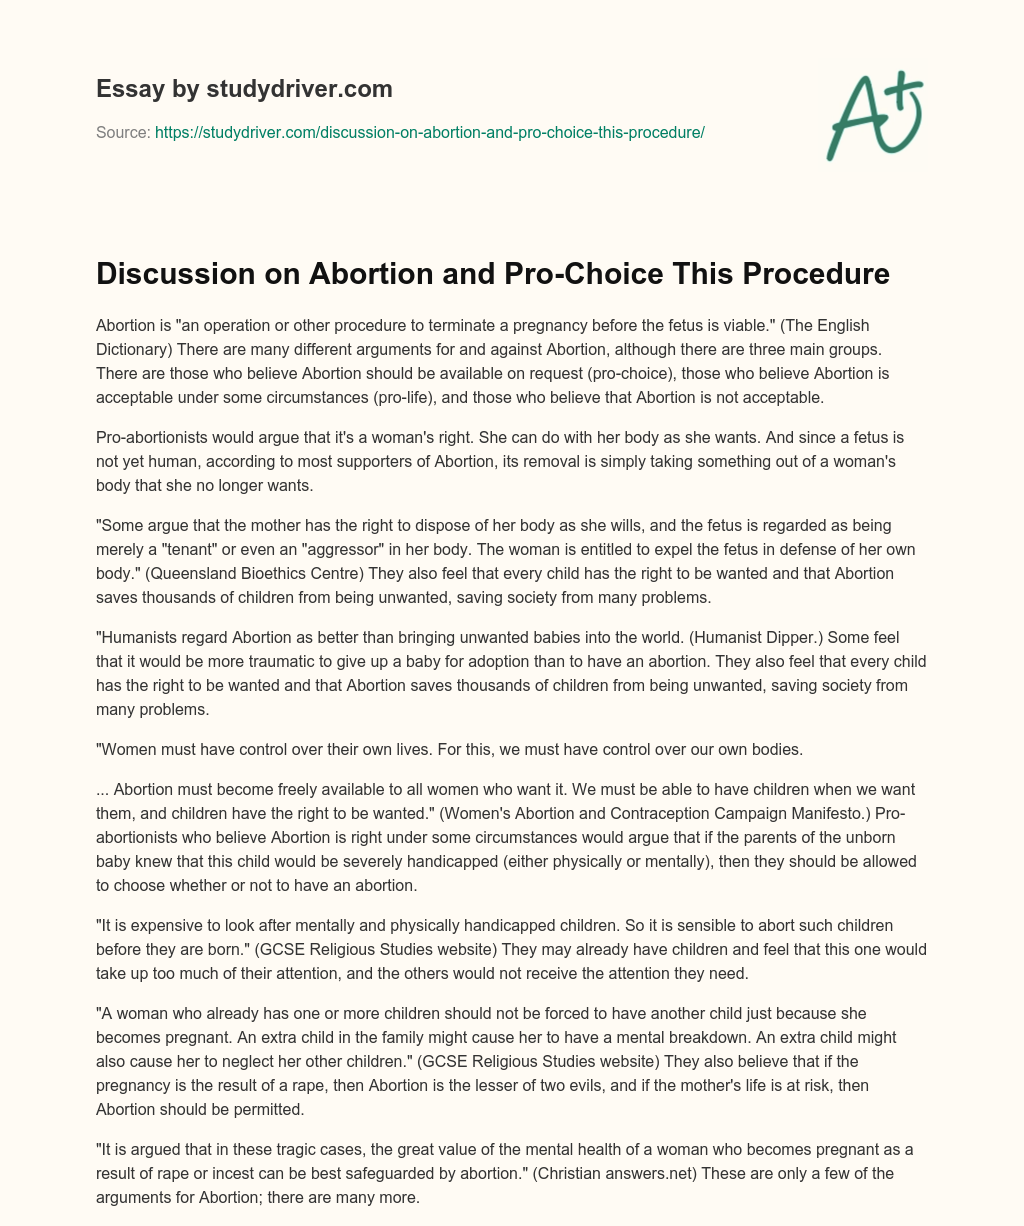 Discussion on Abortion and Pro-Choice this Procedure essay